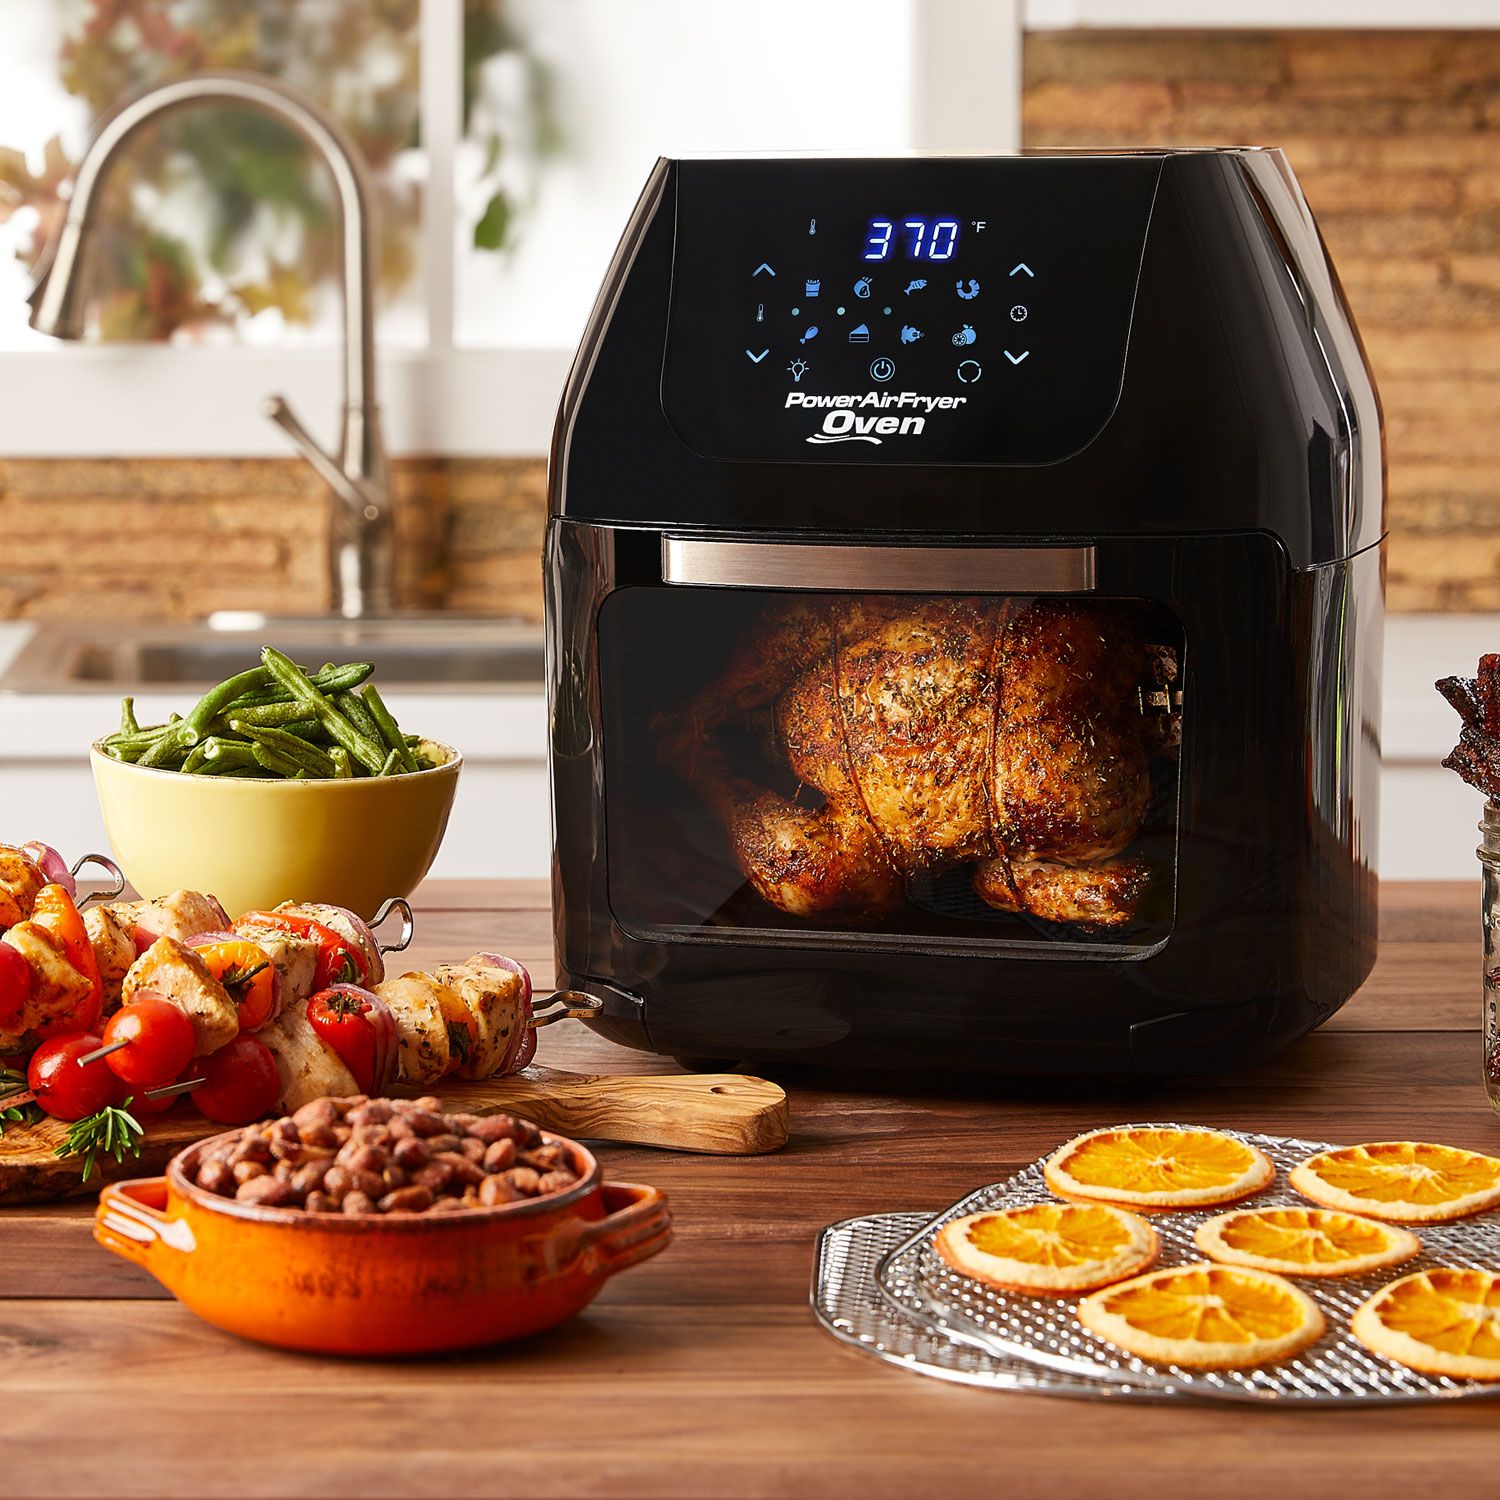 Using The Shelves In The PowerXL Air Fryer Oven 